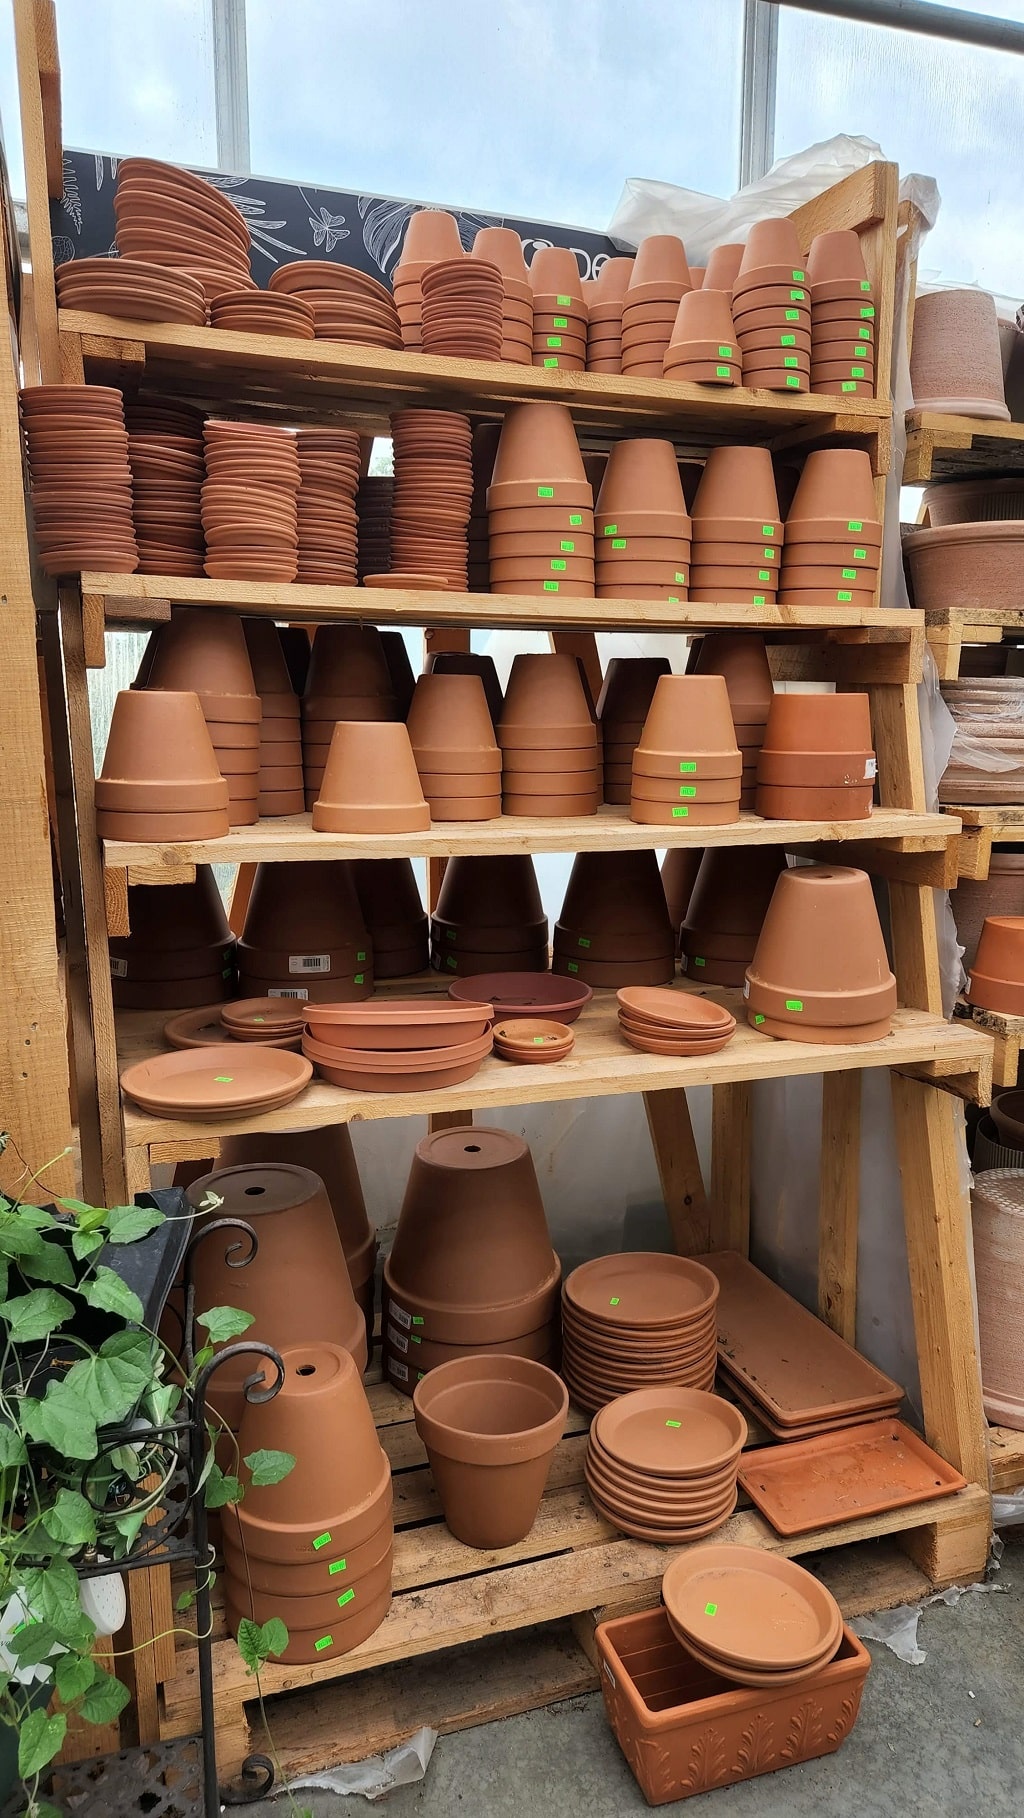 How to Plant Plants for Kitchen Garden in Terra Cotta Pots